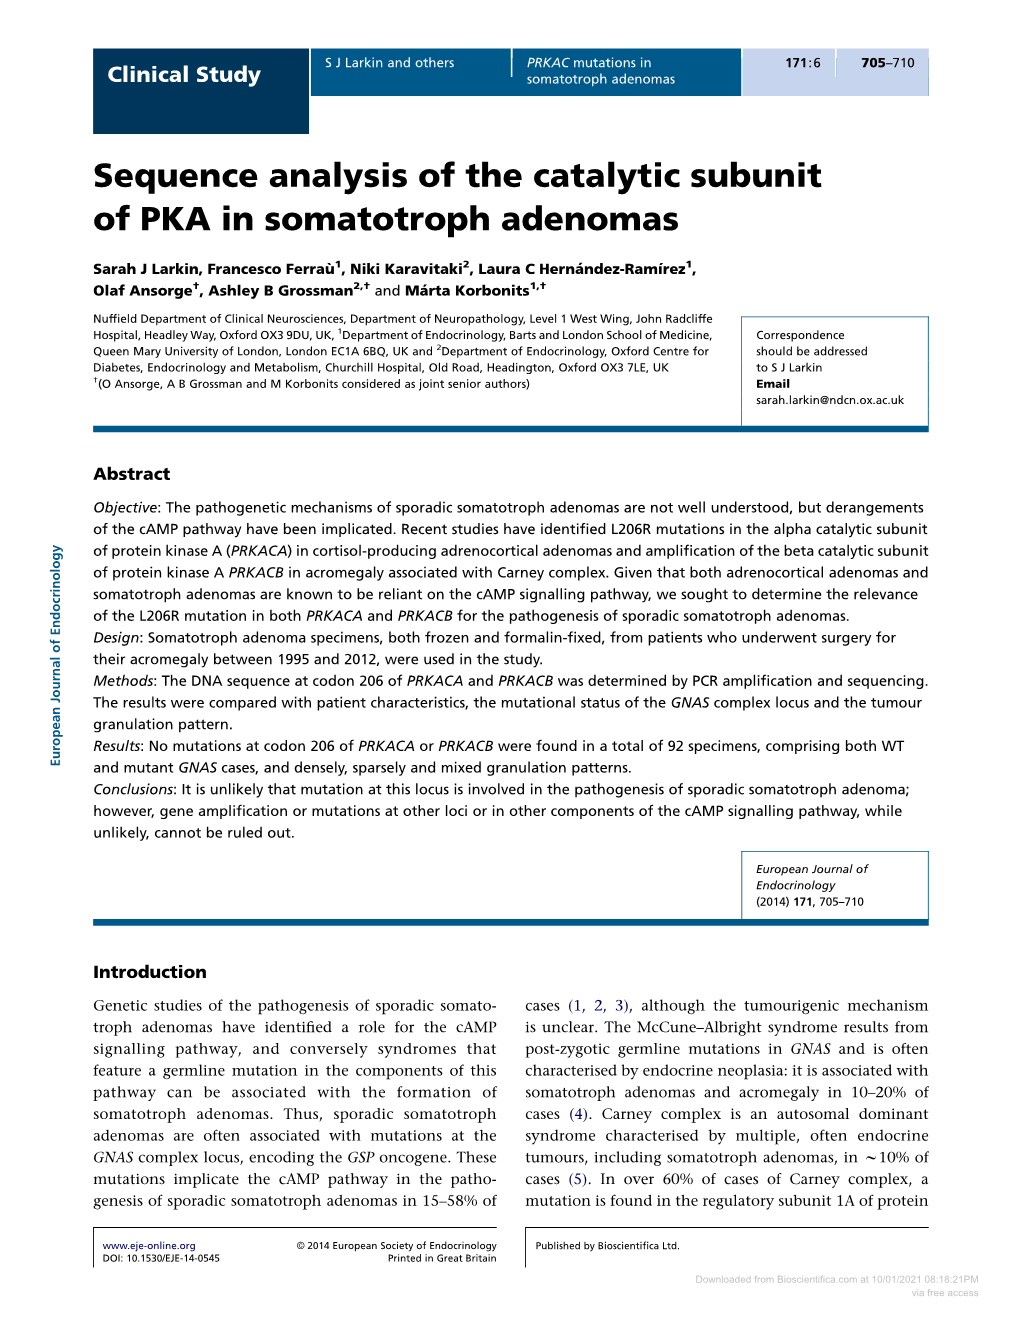 Sequence Analysis of the Catalytic Subunit of PKA in Somatotroph Adenomas